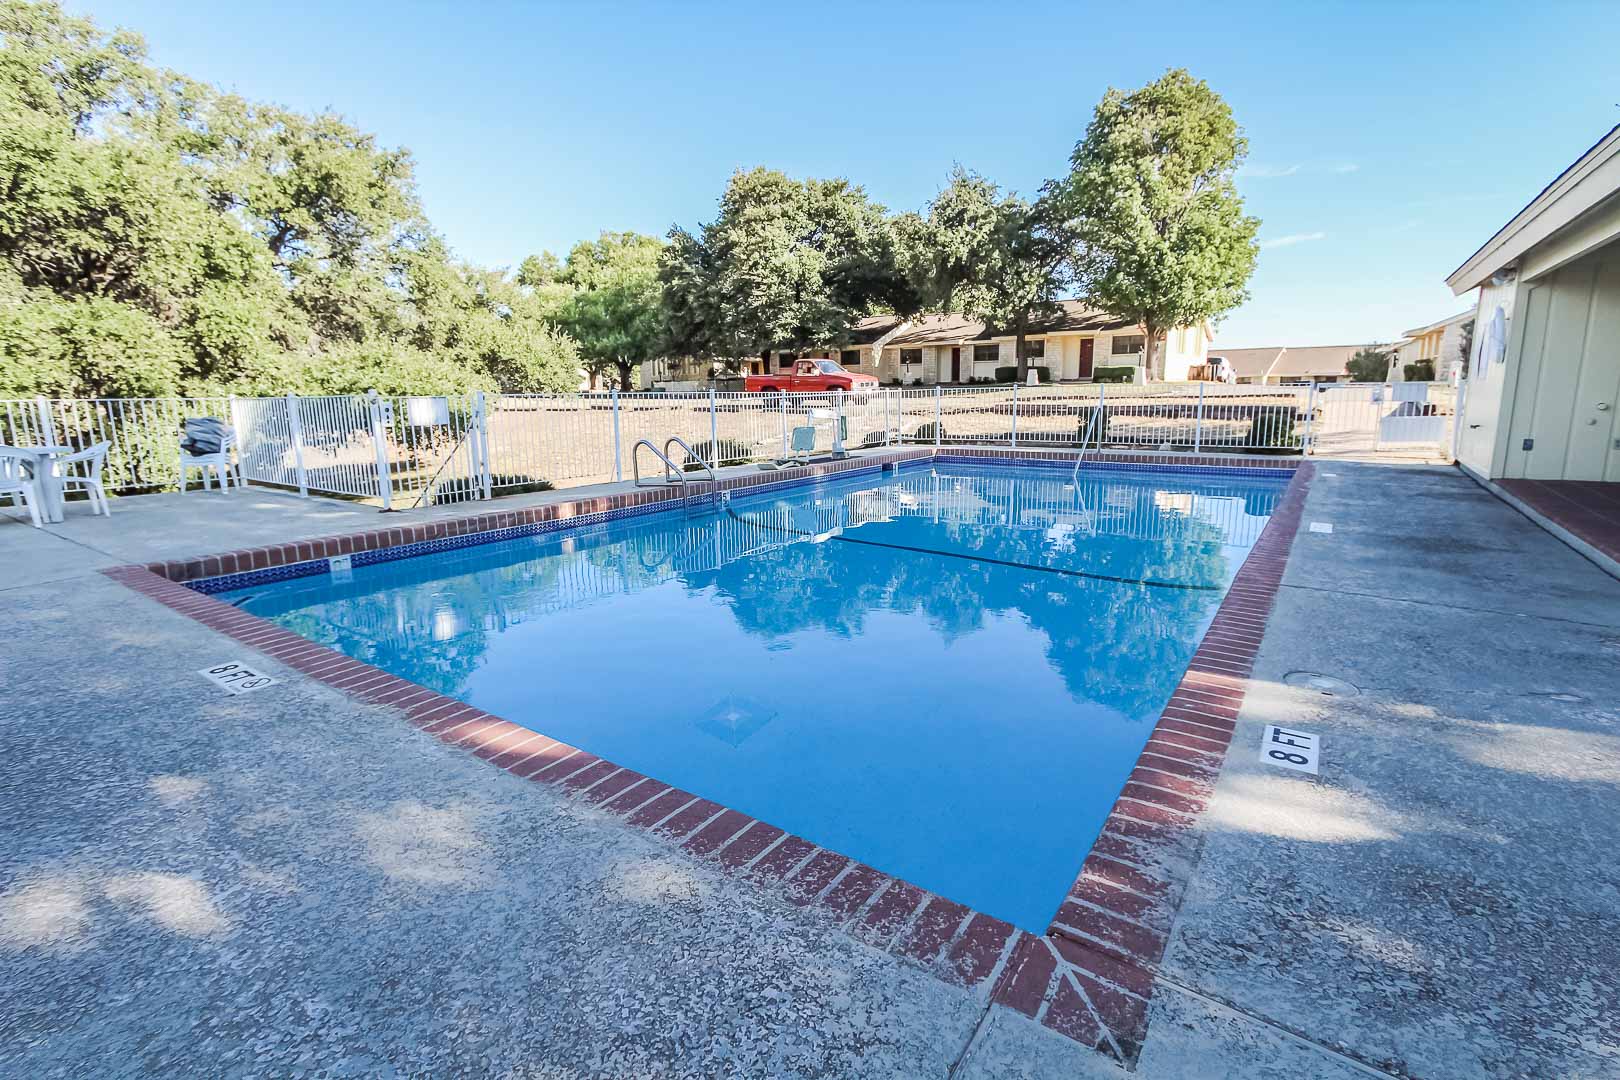 A peaceful outdoor swimming pool at VRI's Vacation Village at Lake Travis in Texas.